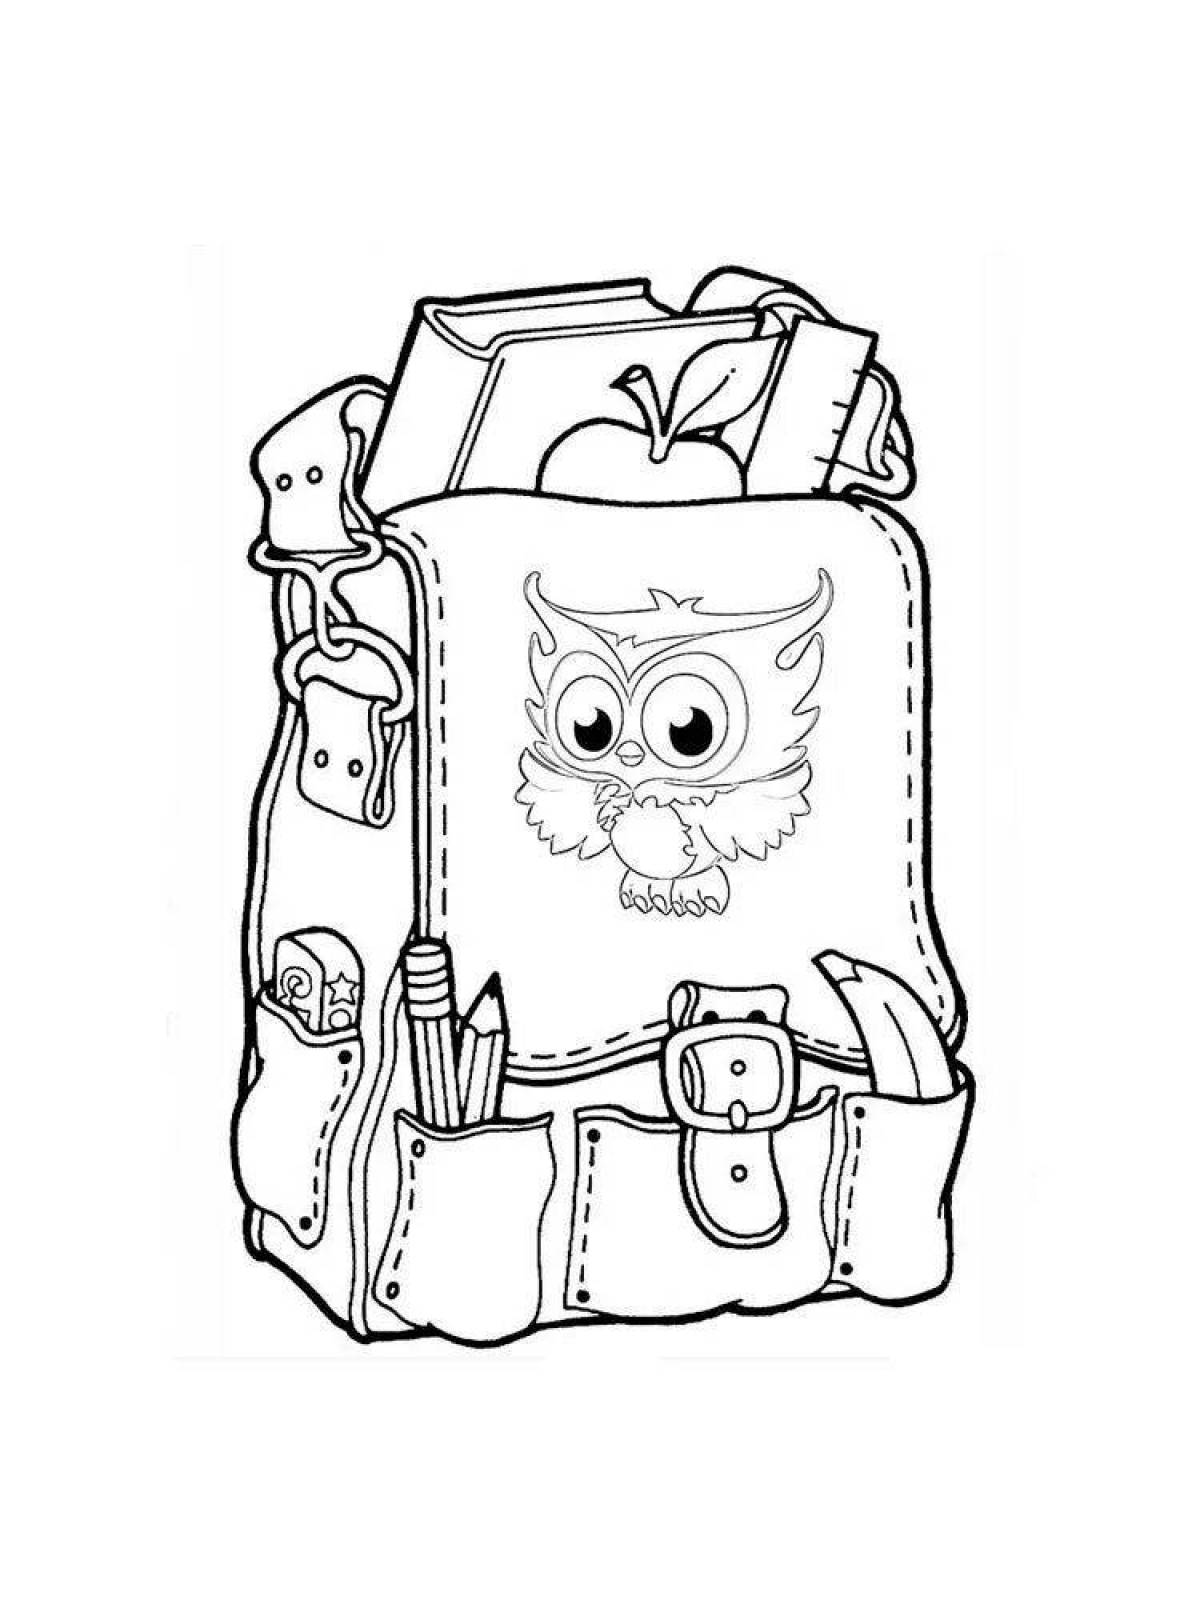 Playful backpack coloring page for kids